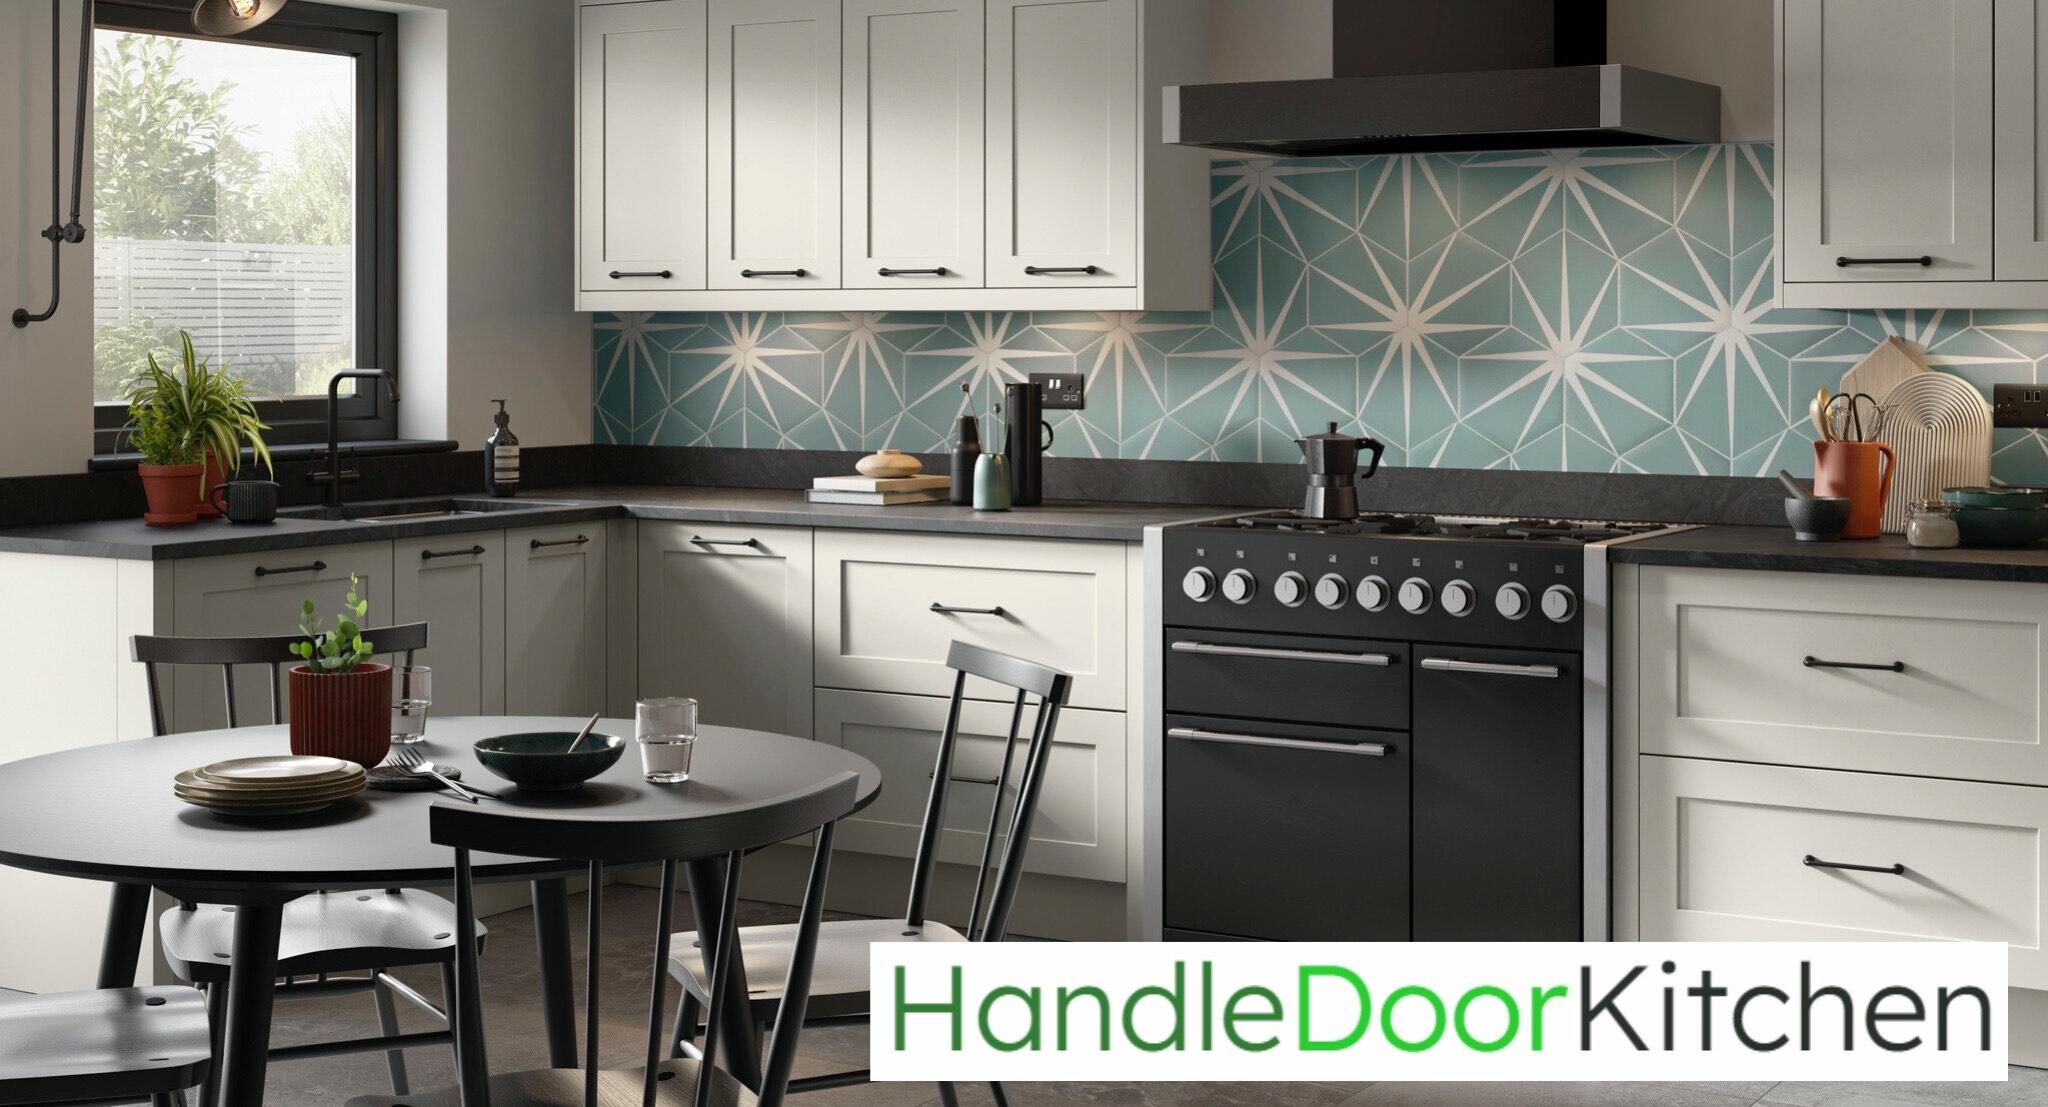 Check out our associated website for all your kitchen door and handle needs!